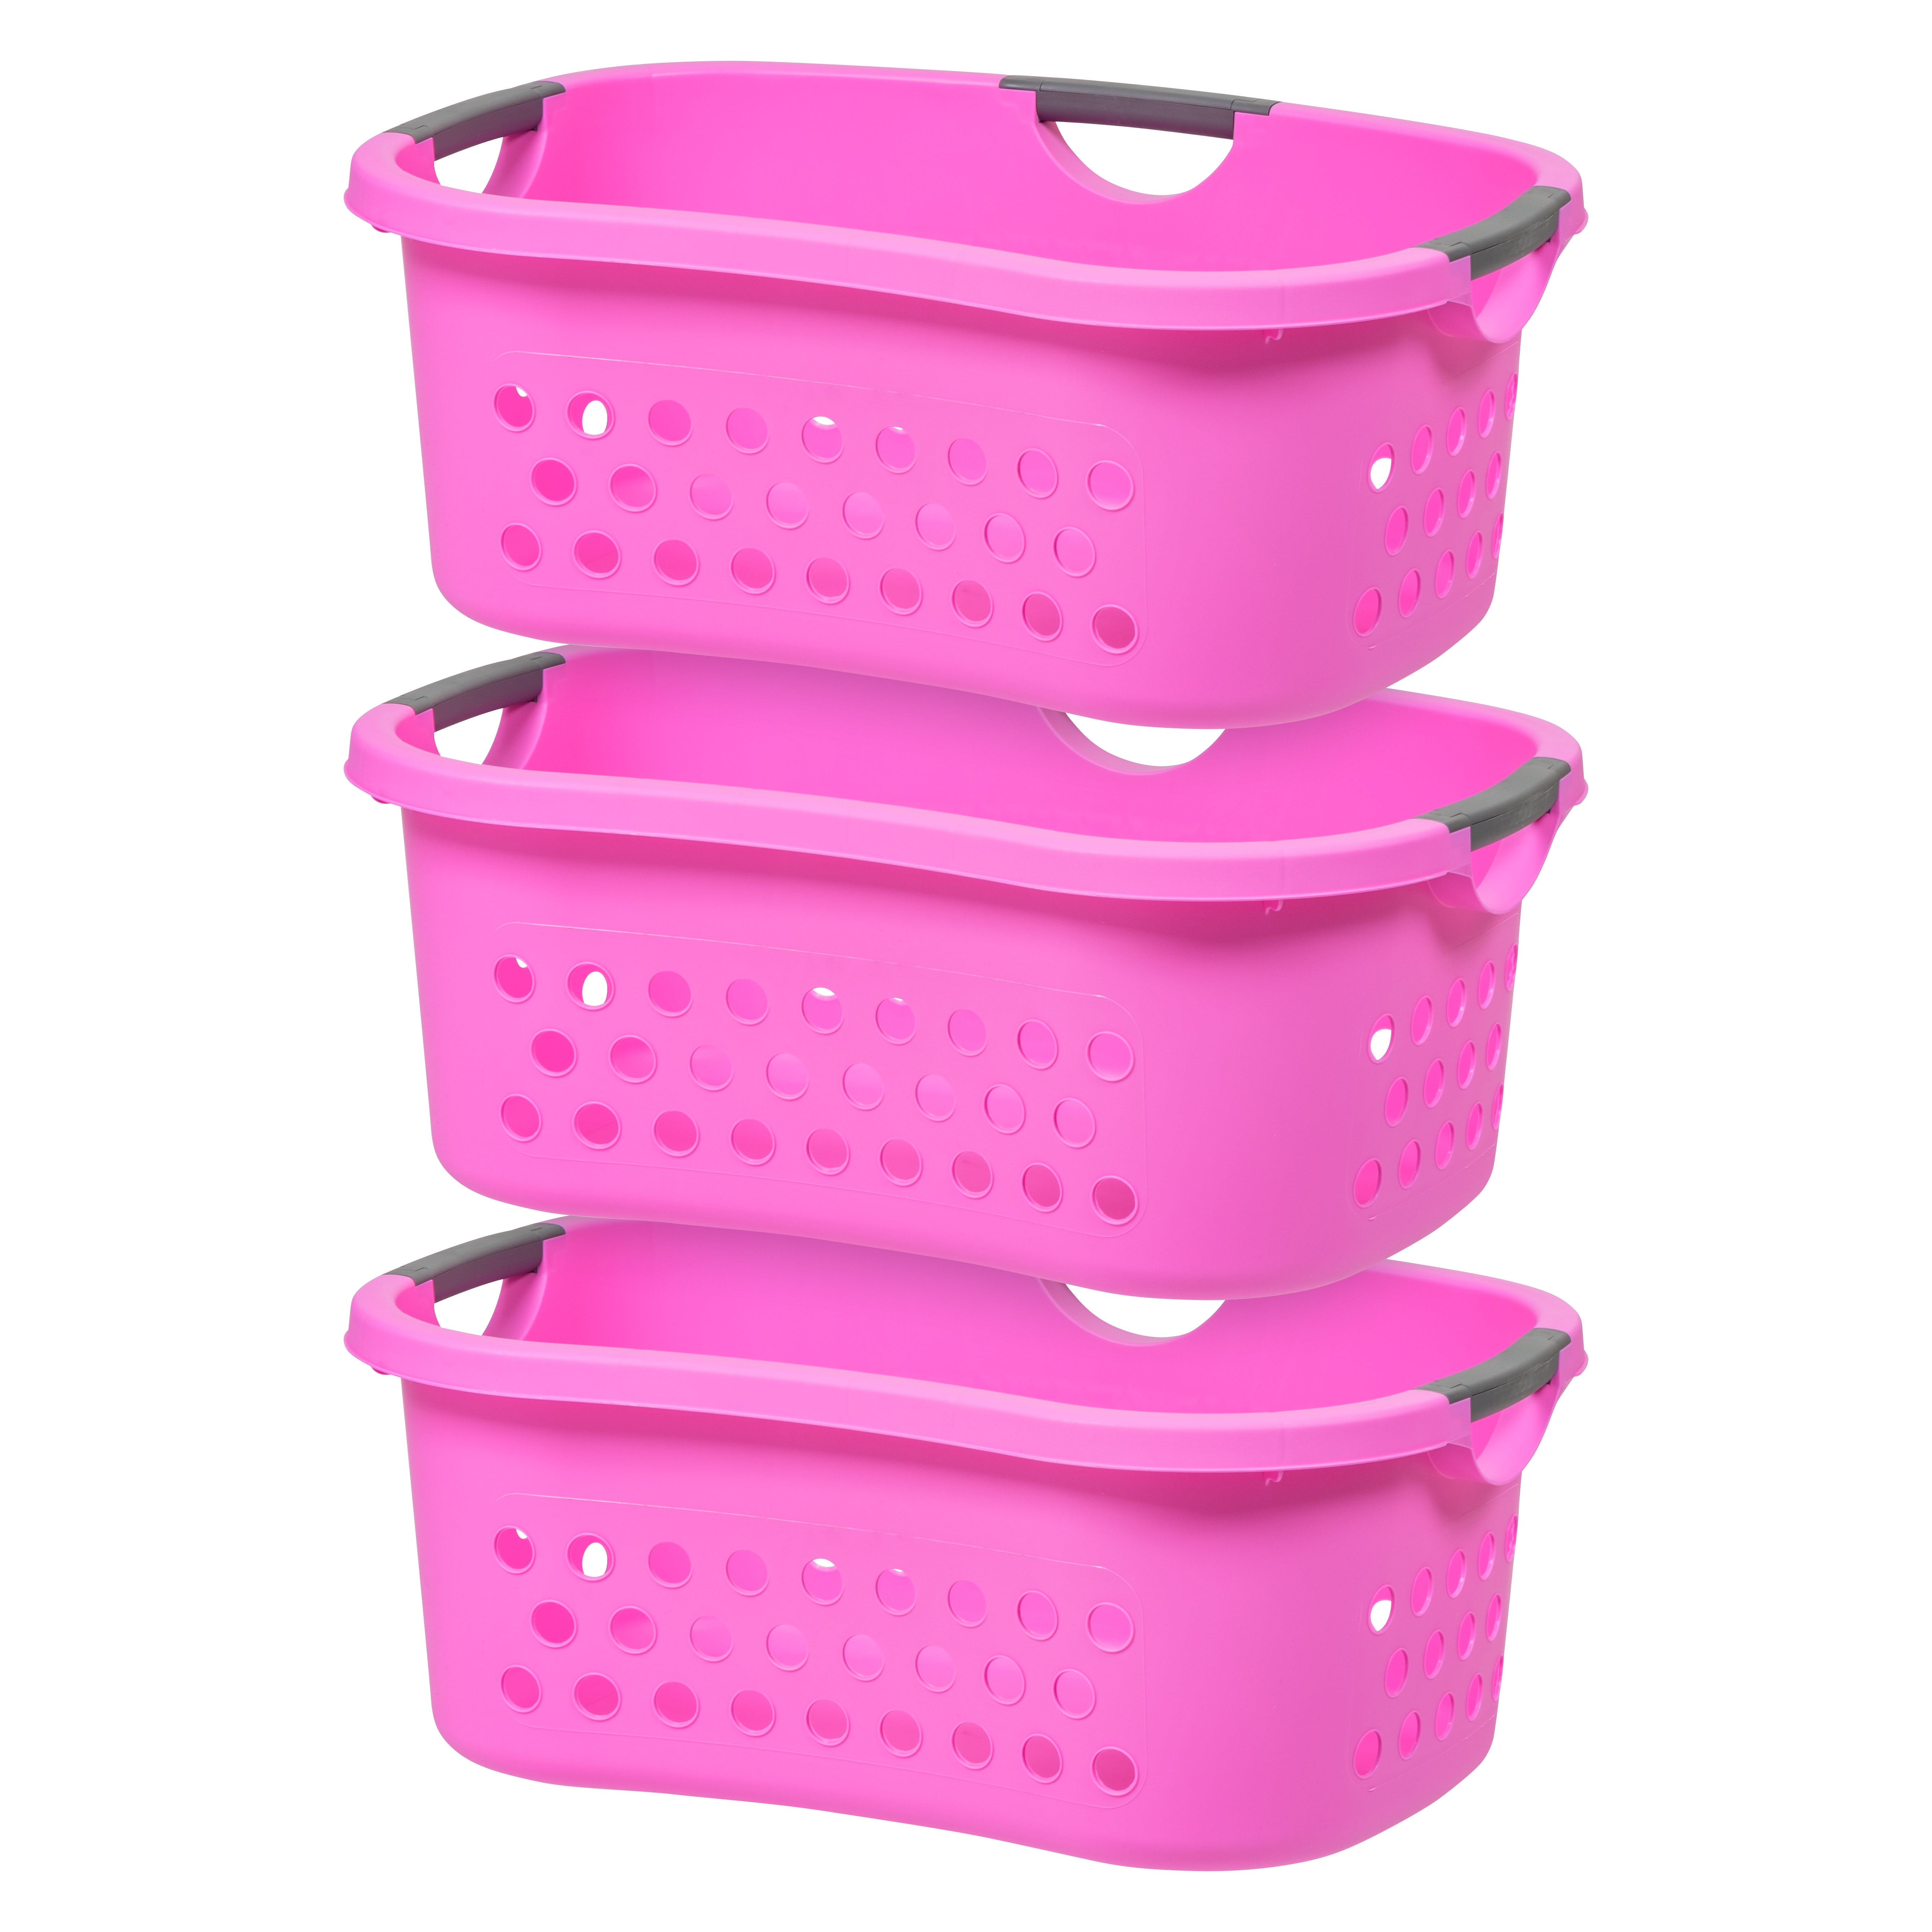 IRIS 10 Piece Count Plastic in the Laundry Hampers & Baskets department at